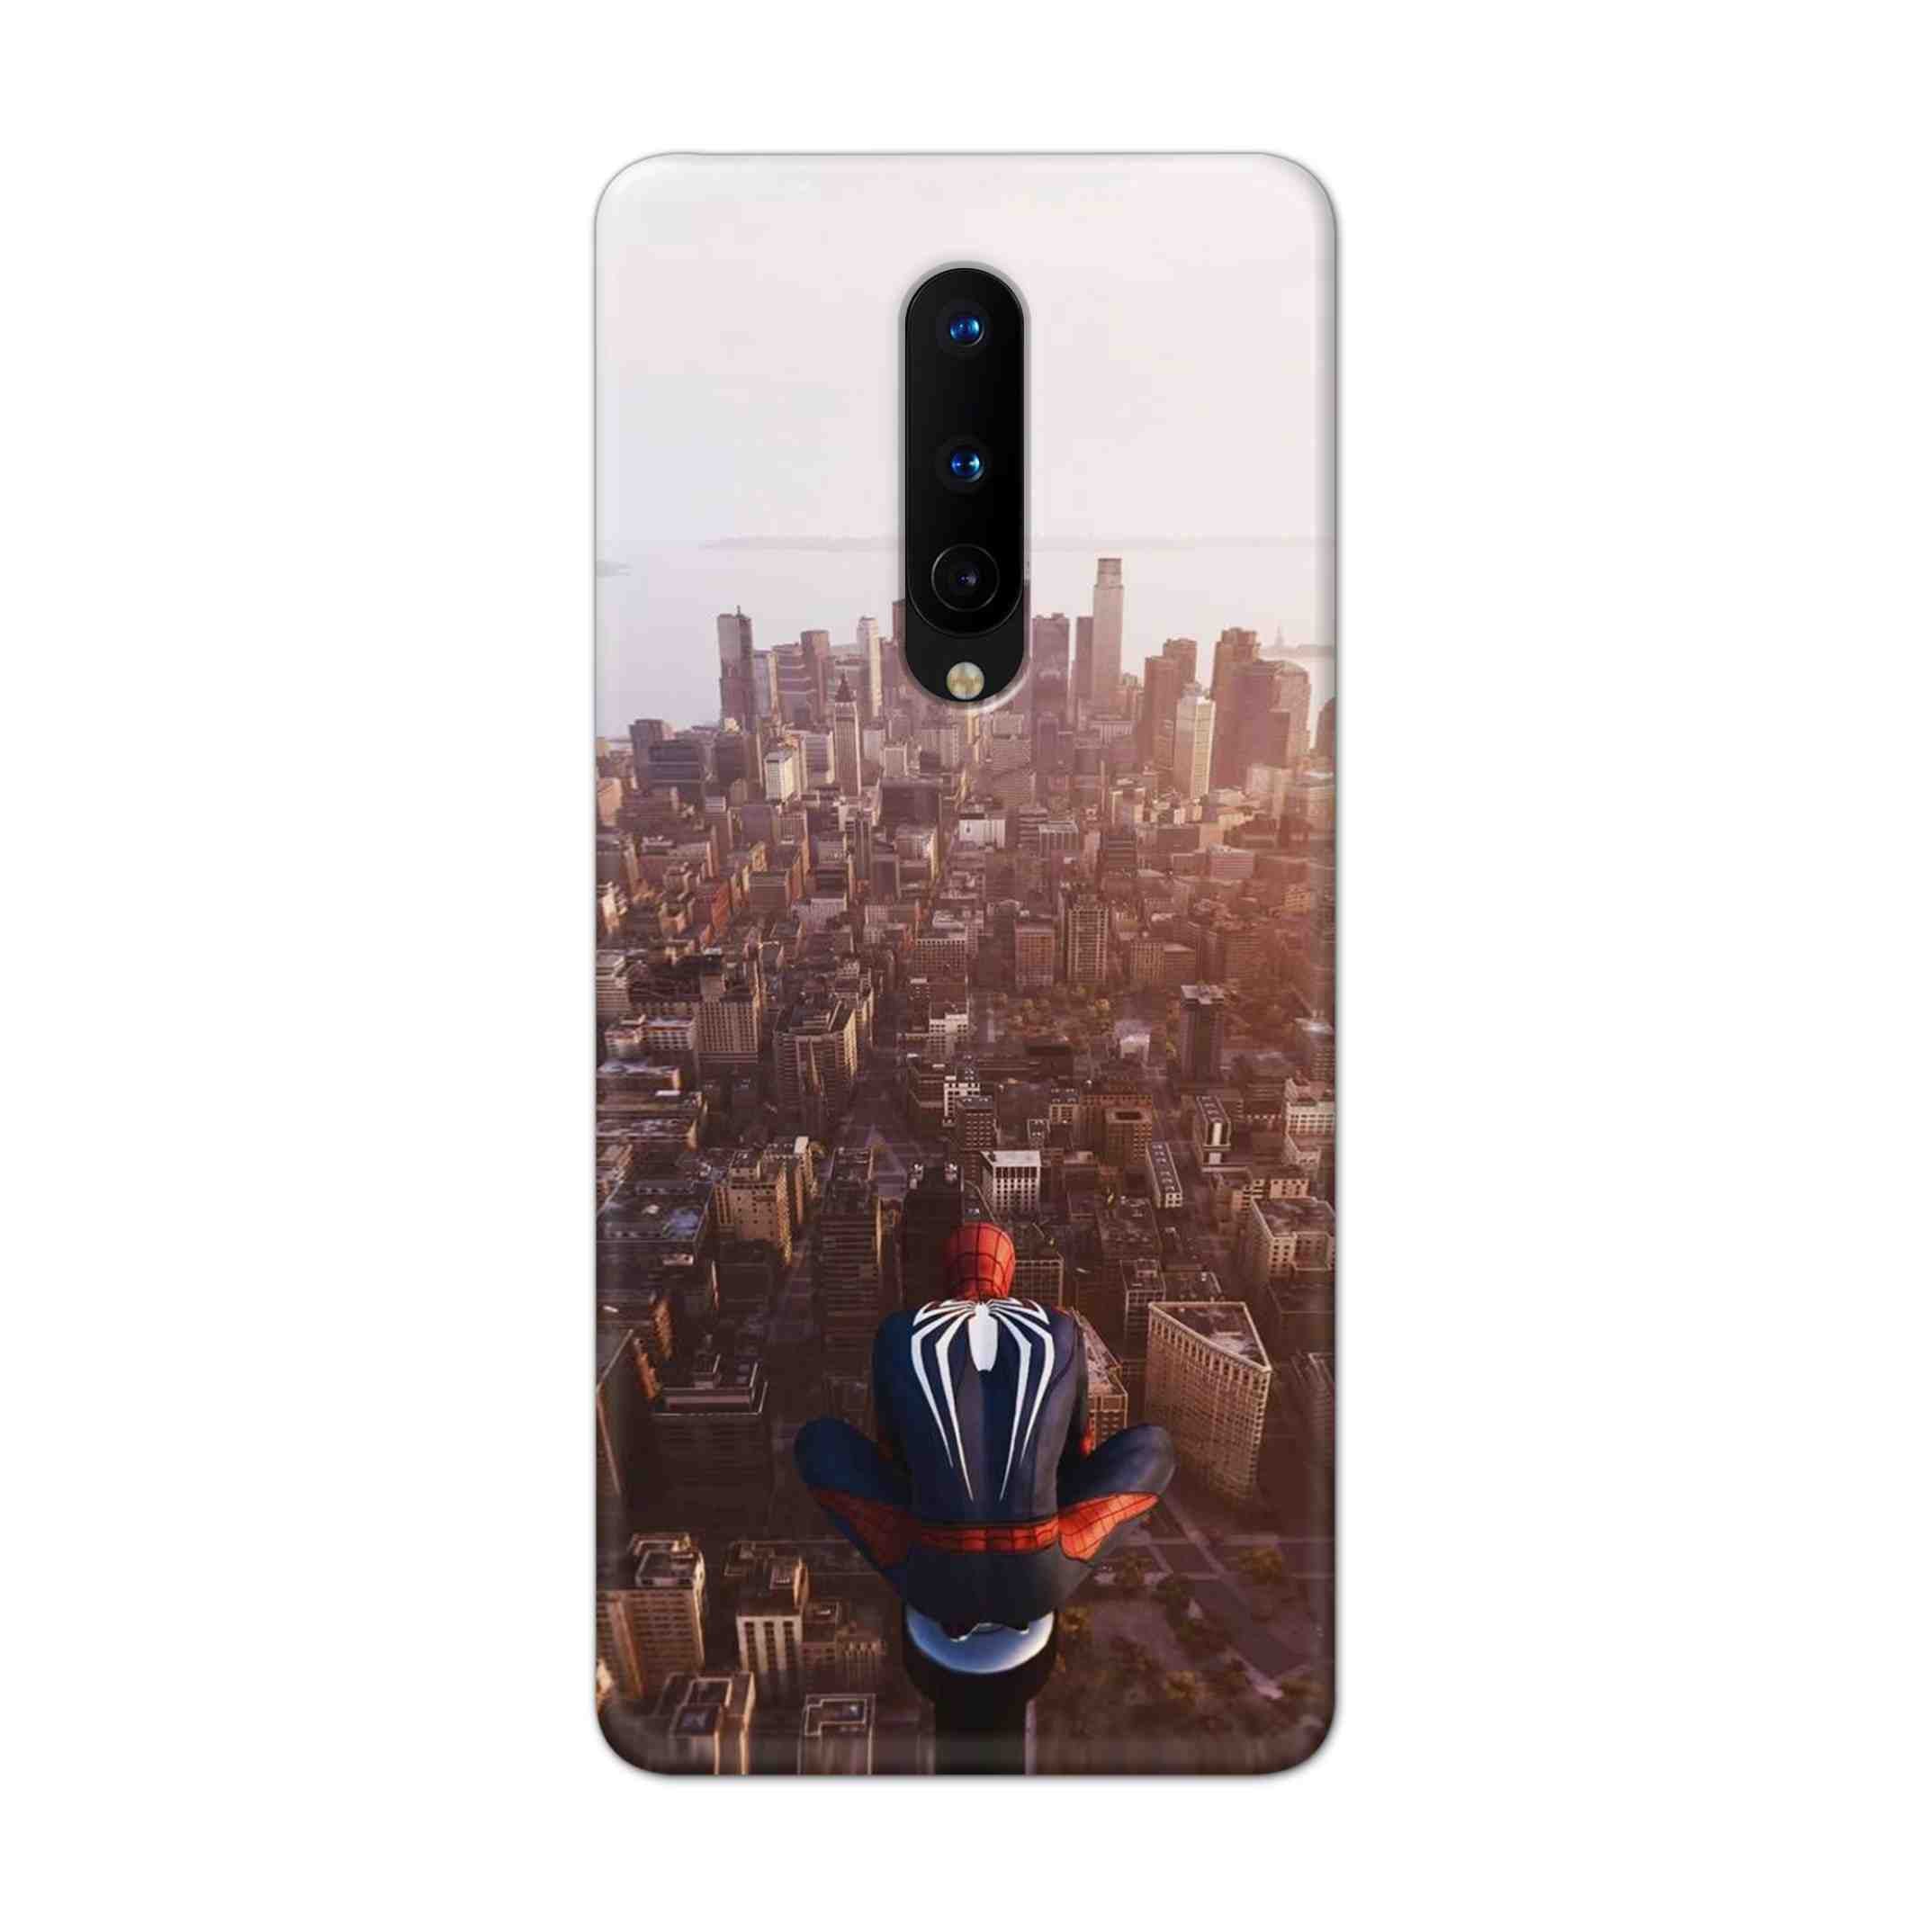 Buy City Of Spiderman Hard Back Mobile Phone Case Cover For OnePlus 8 Online